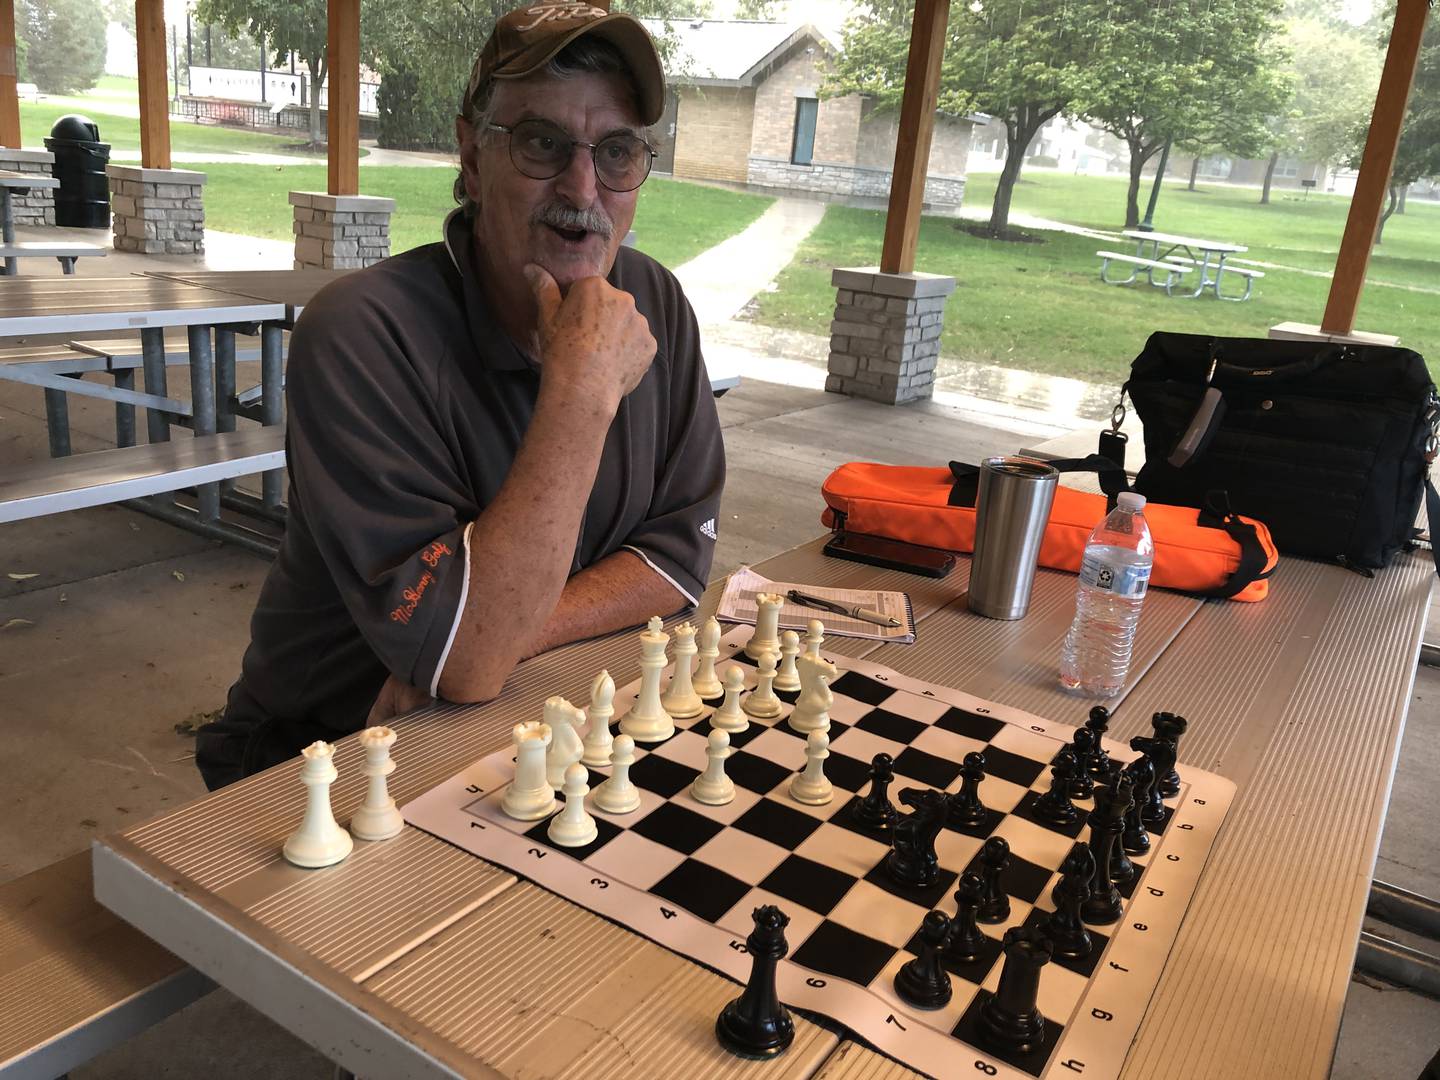 Jeff Varda waits for his first chess opponent at McHenry's Veterans Memorial Park on Tuesday, Sept. 20, 2022. The group of chess players is seeking in indoor space for their game nights.